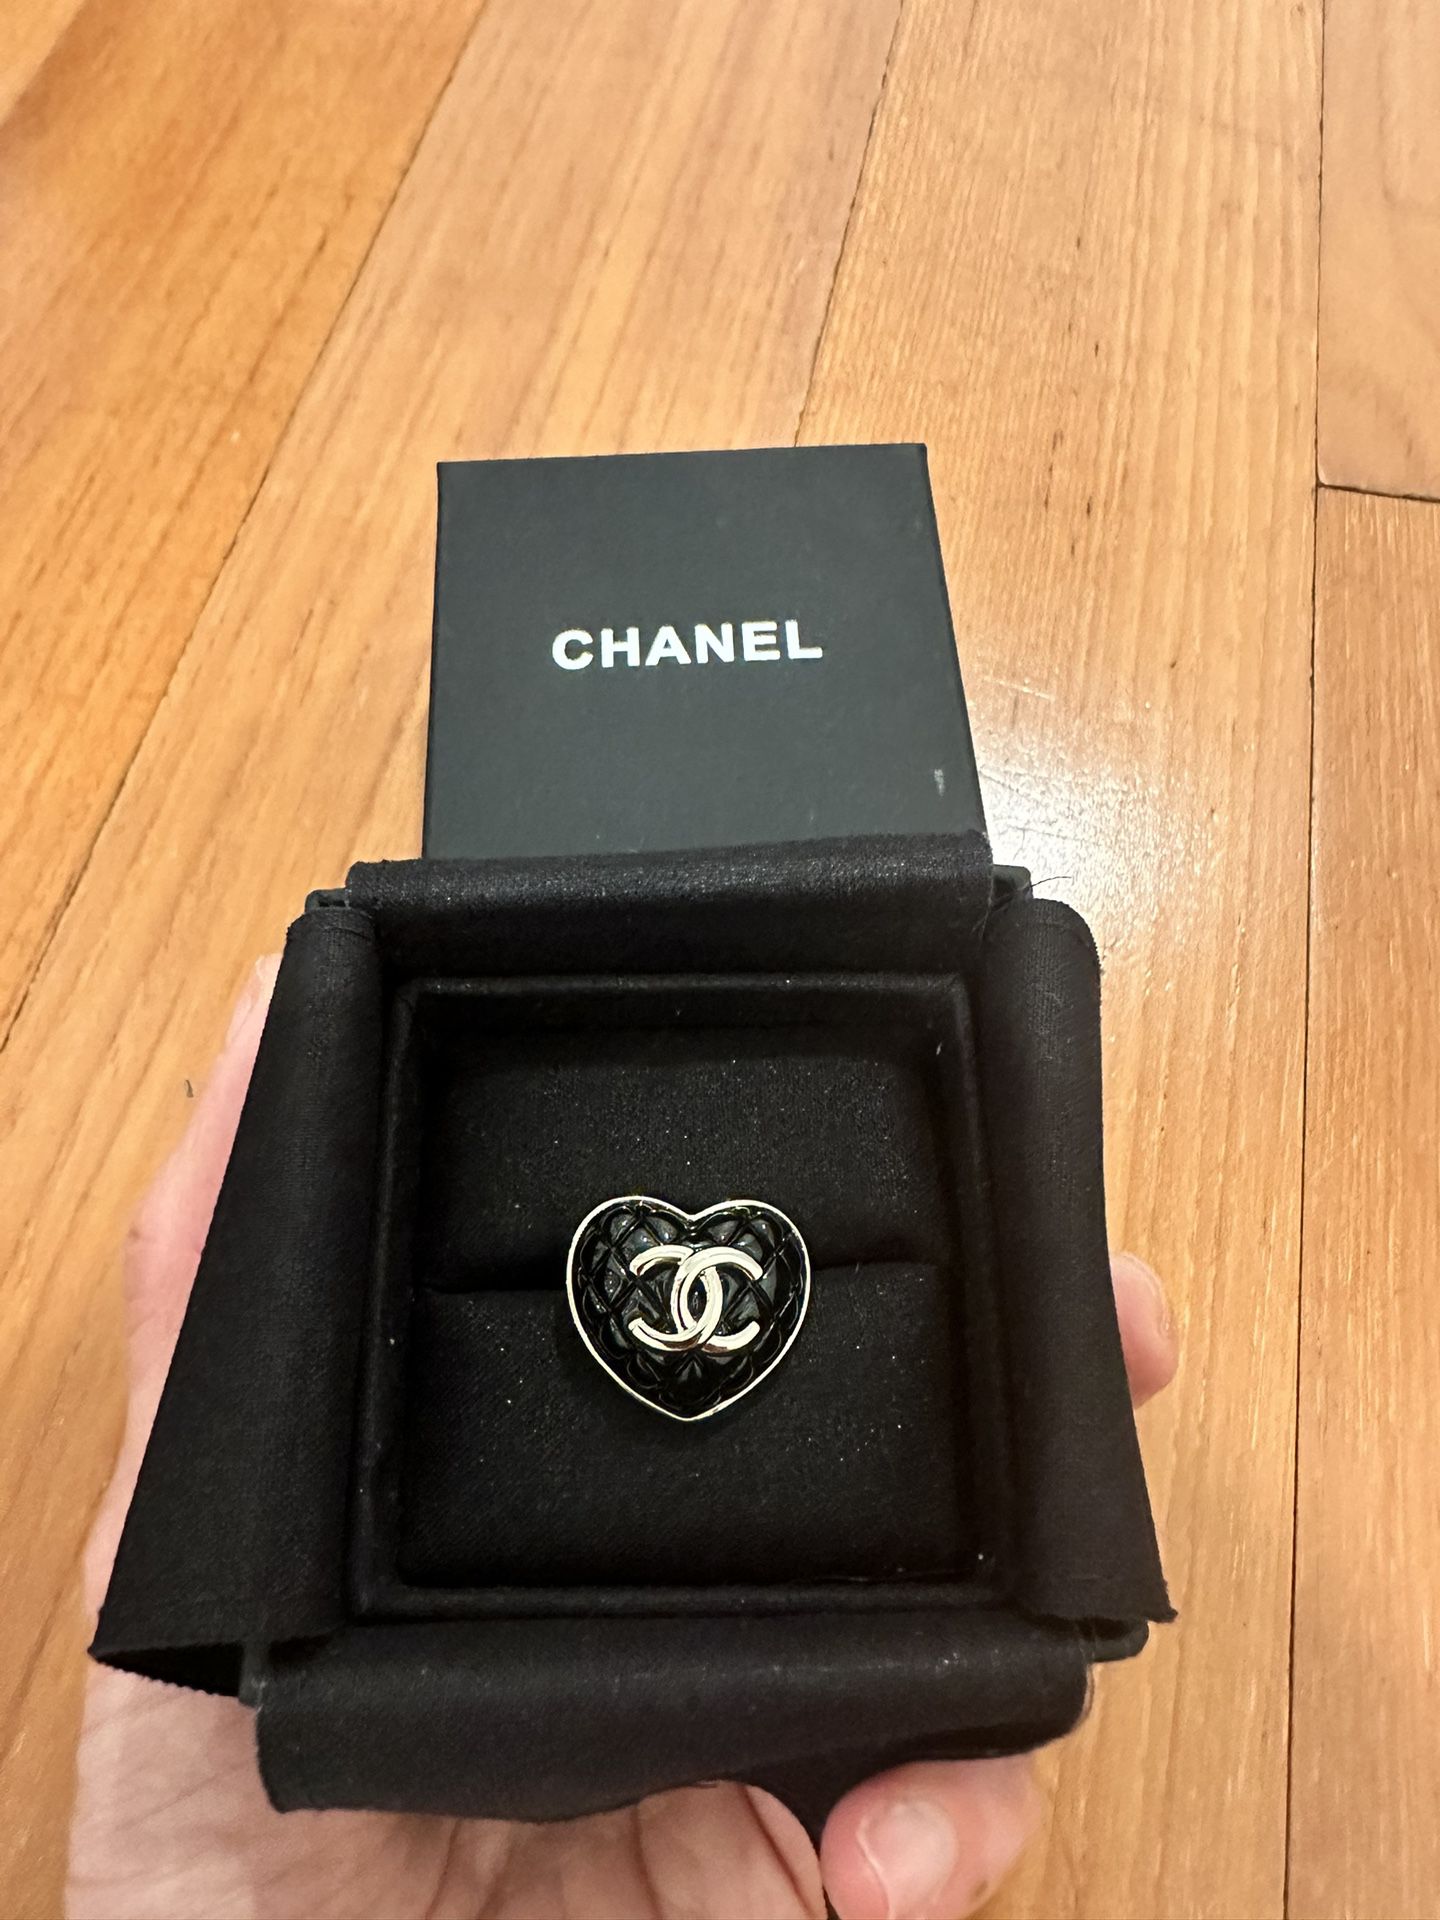 Chanel Heart Pin for Sale in Los Angeles, CA - OfferUp